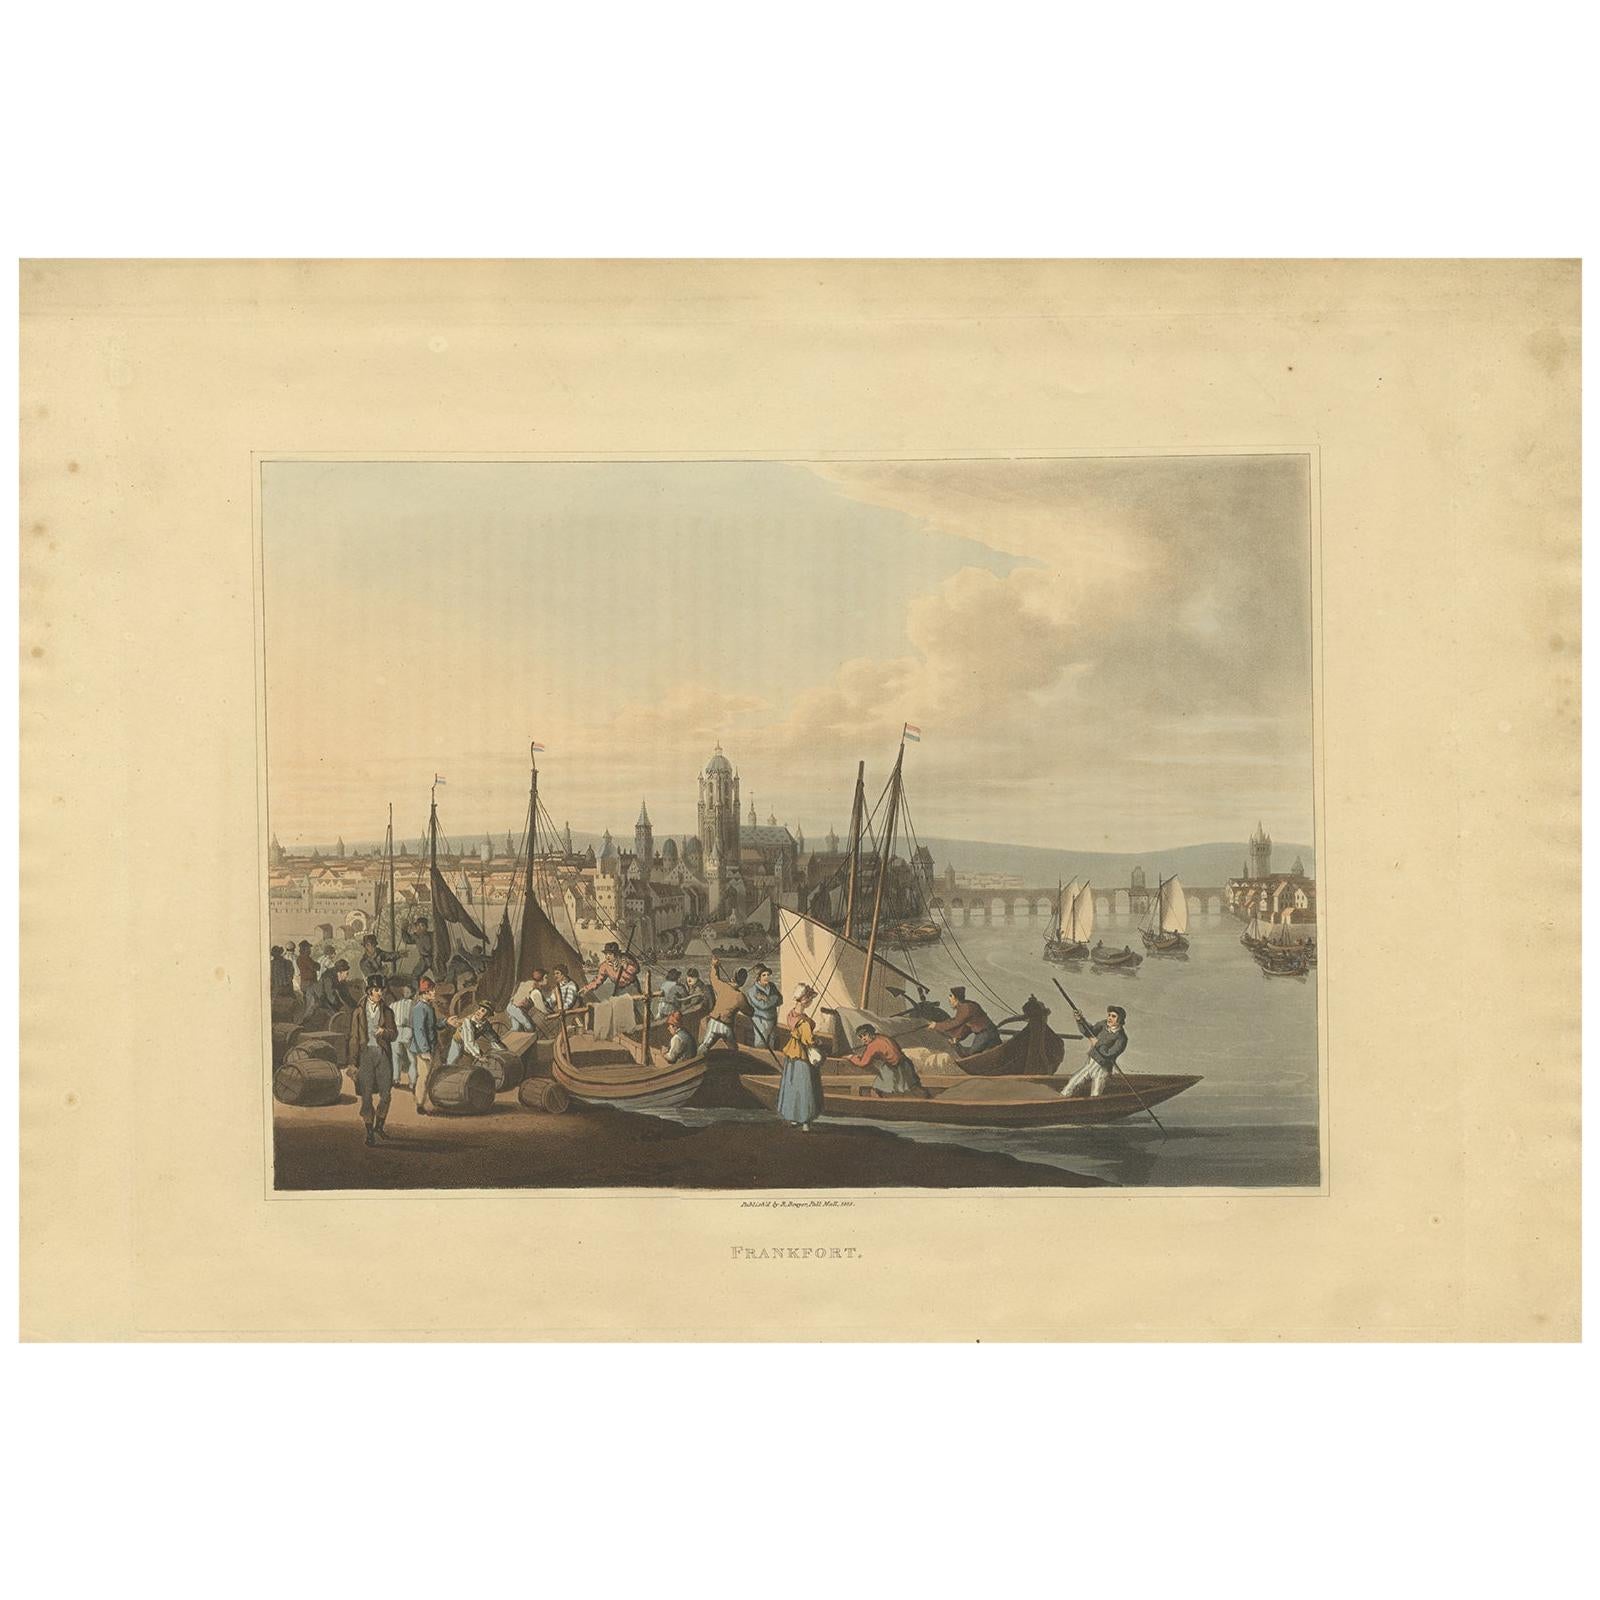 Antique Print of Frankfurt by Bowyer, '1816'